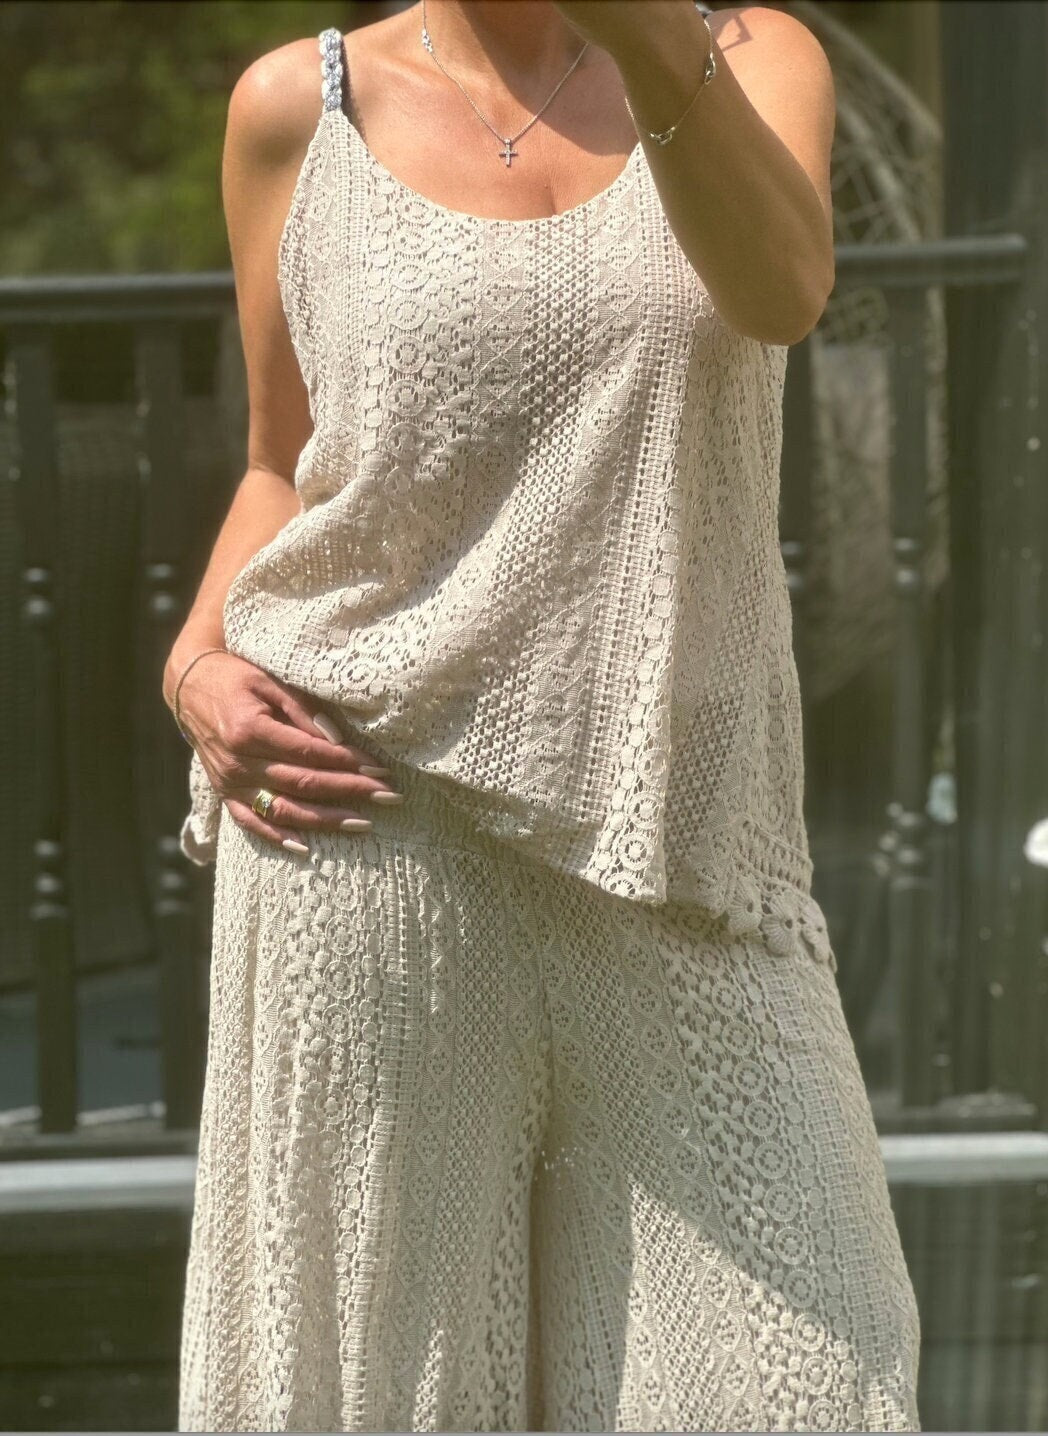 Made in Italy Stone Crochet Lined Vest, Blouse, Top